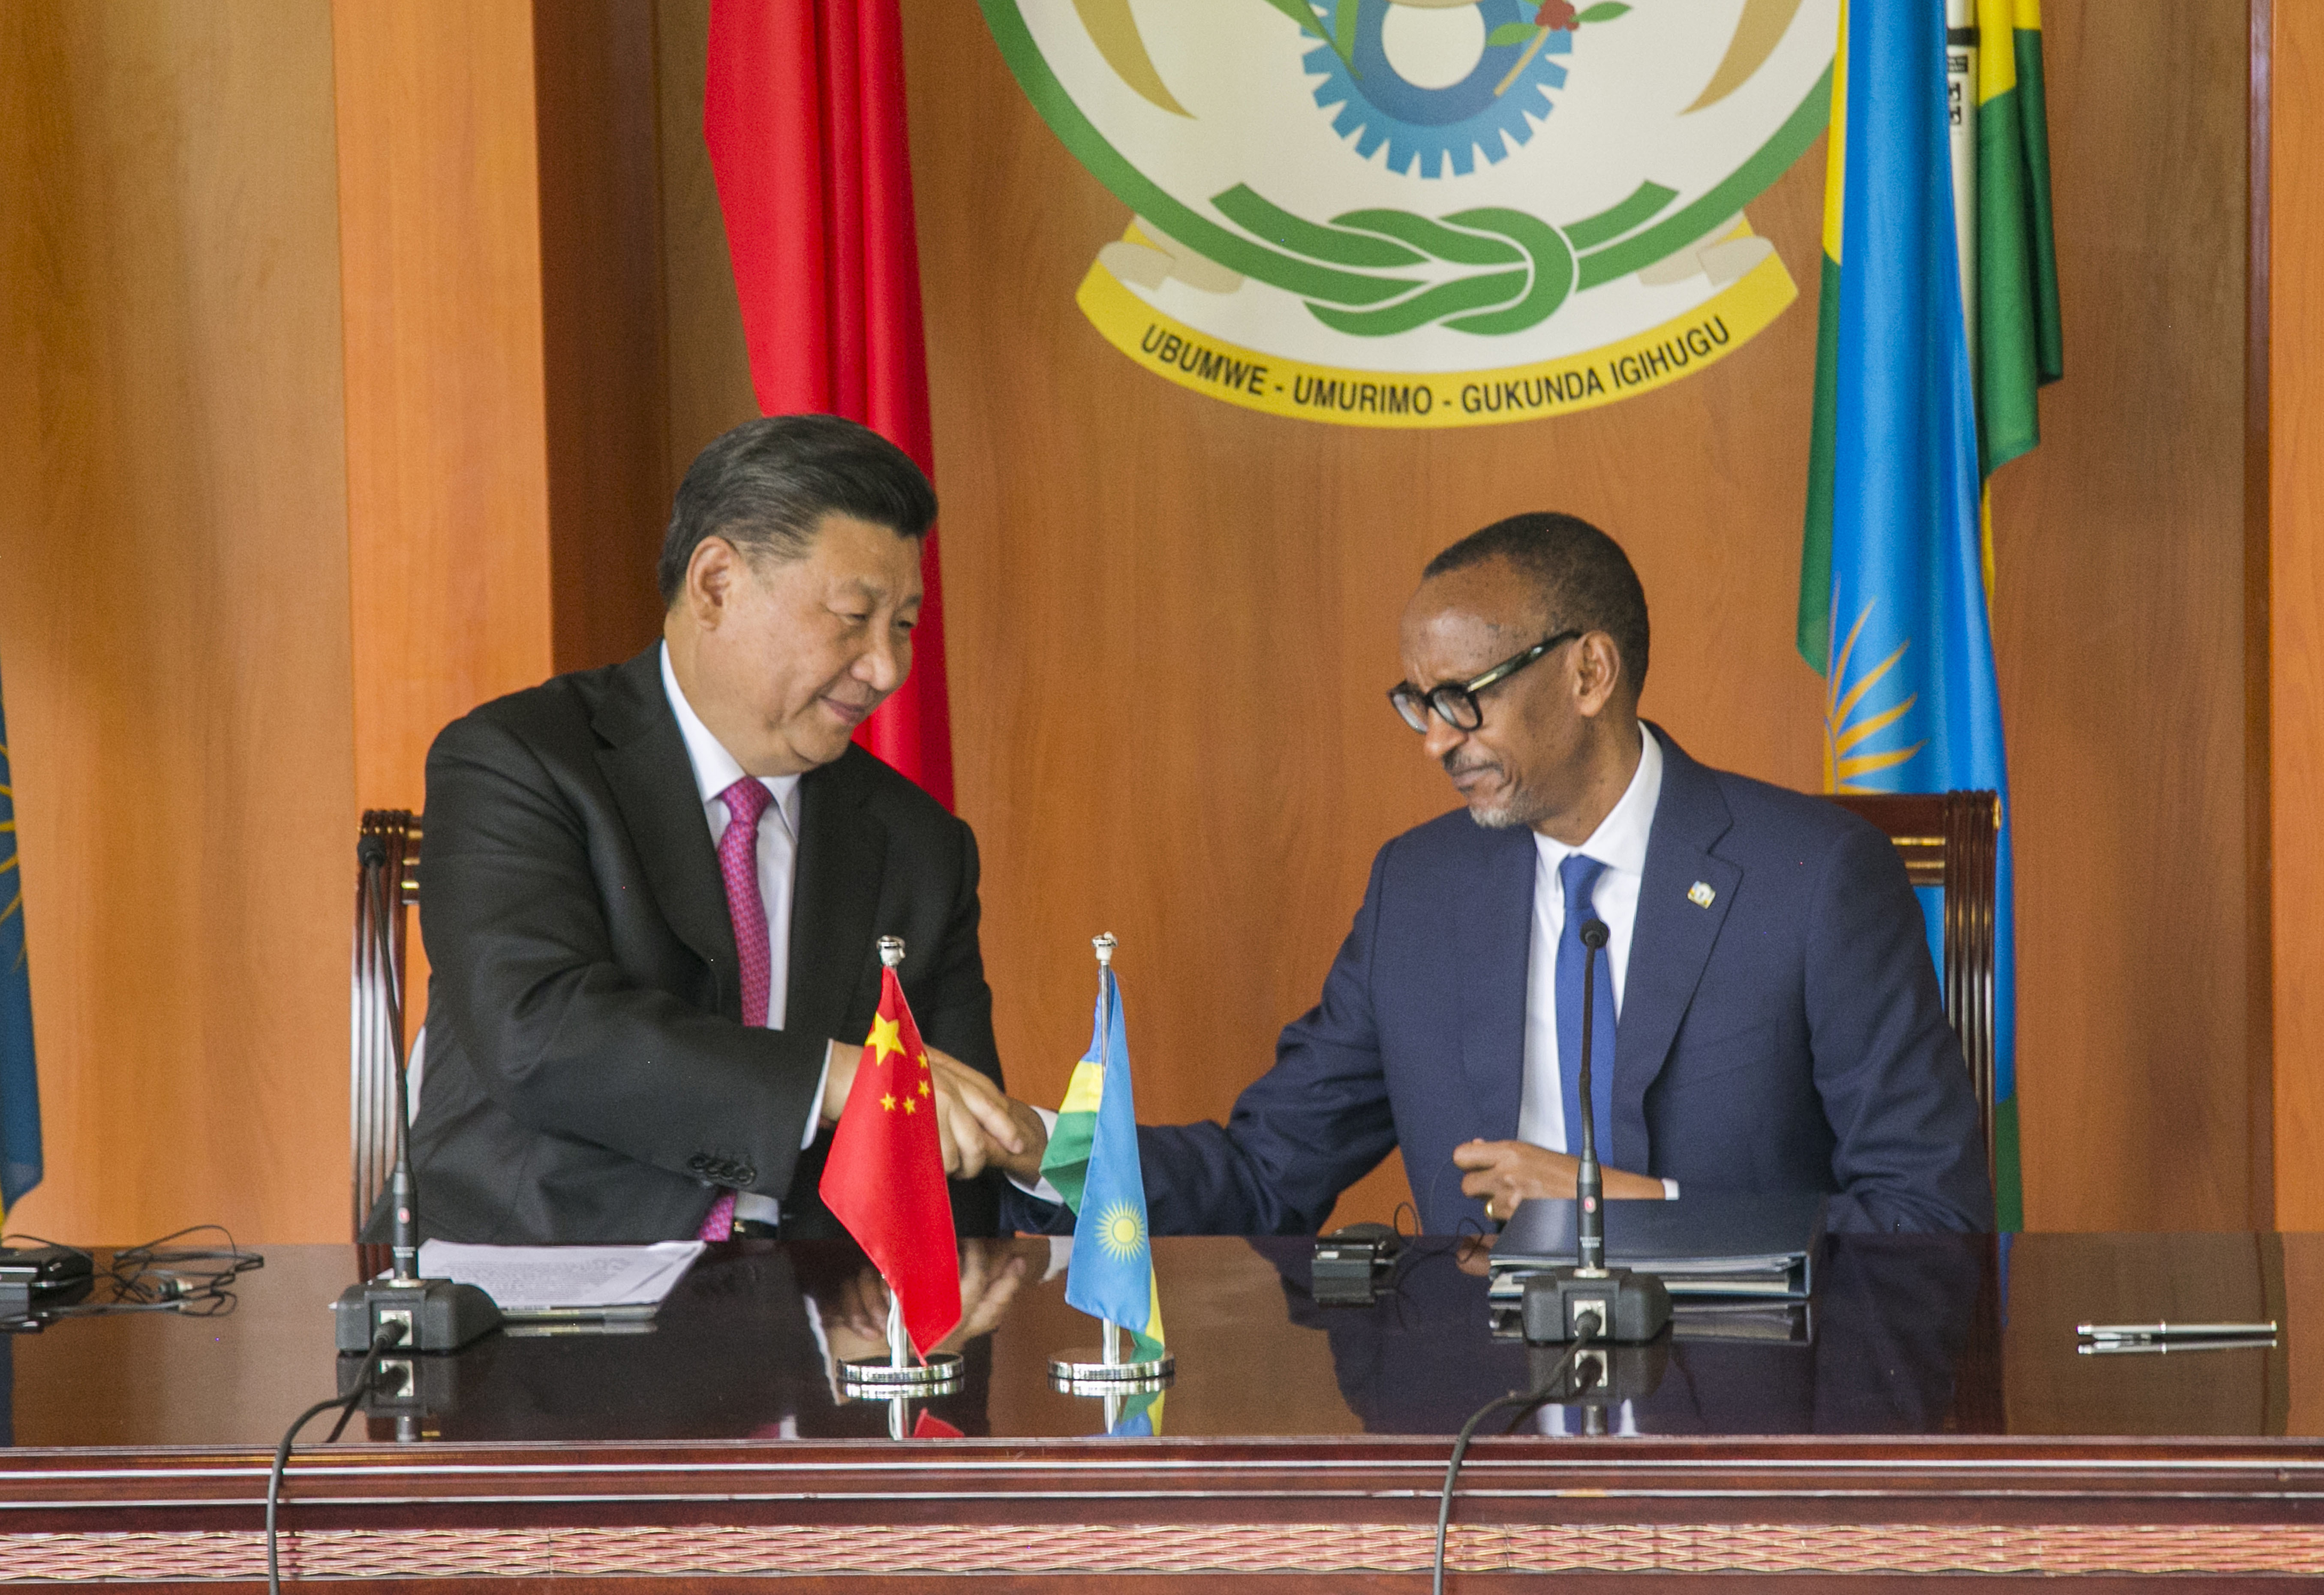 China's President Xi Jinping, left, shakes hands with Rwanda's President Paul Kagame during a press conference at State House, in Kigali, Rwanda, Monday, July 23, 2018. Kagame is praising China’s treatment of Africa “as an equal,” calling it “a revolutionary posture in world affairs.” (AP Photo)